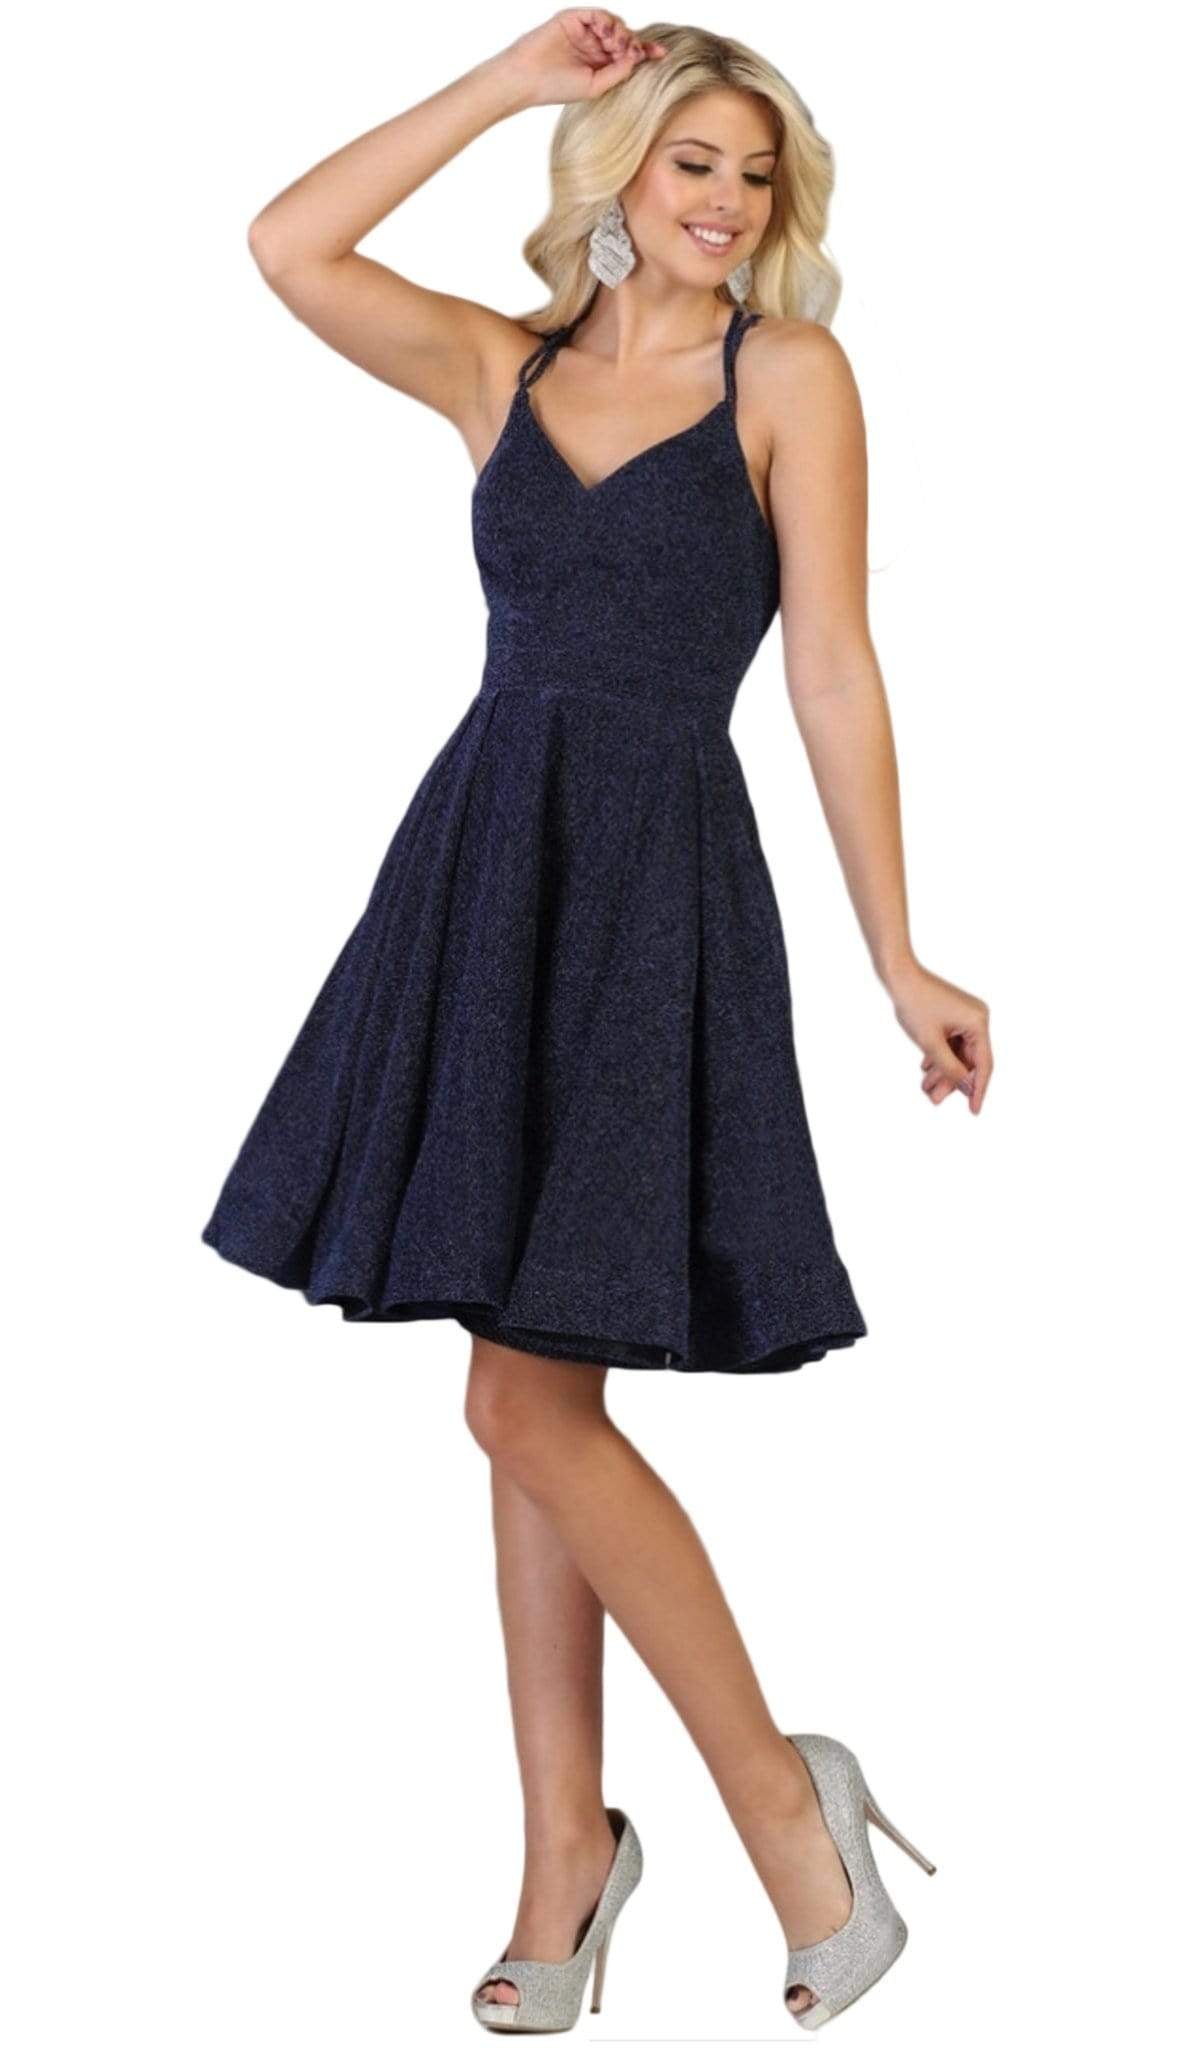 May Queen - RQ7754 Strappy V-Neck Pleated A-Line Dress Cocktail Dresses 4 / Navy